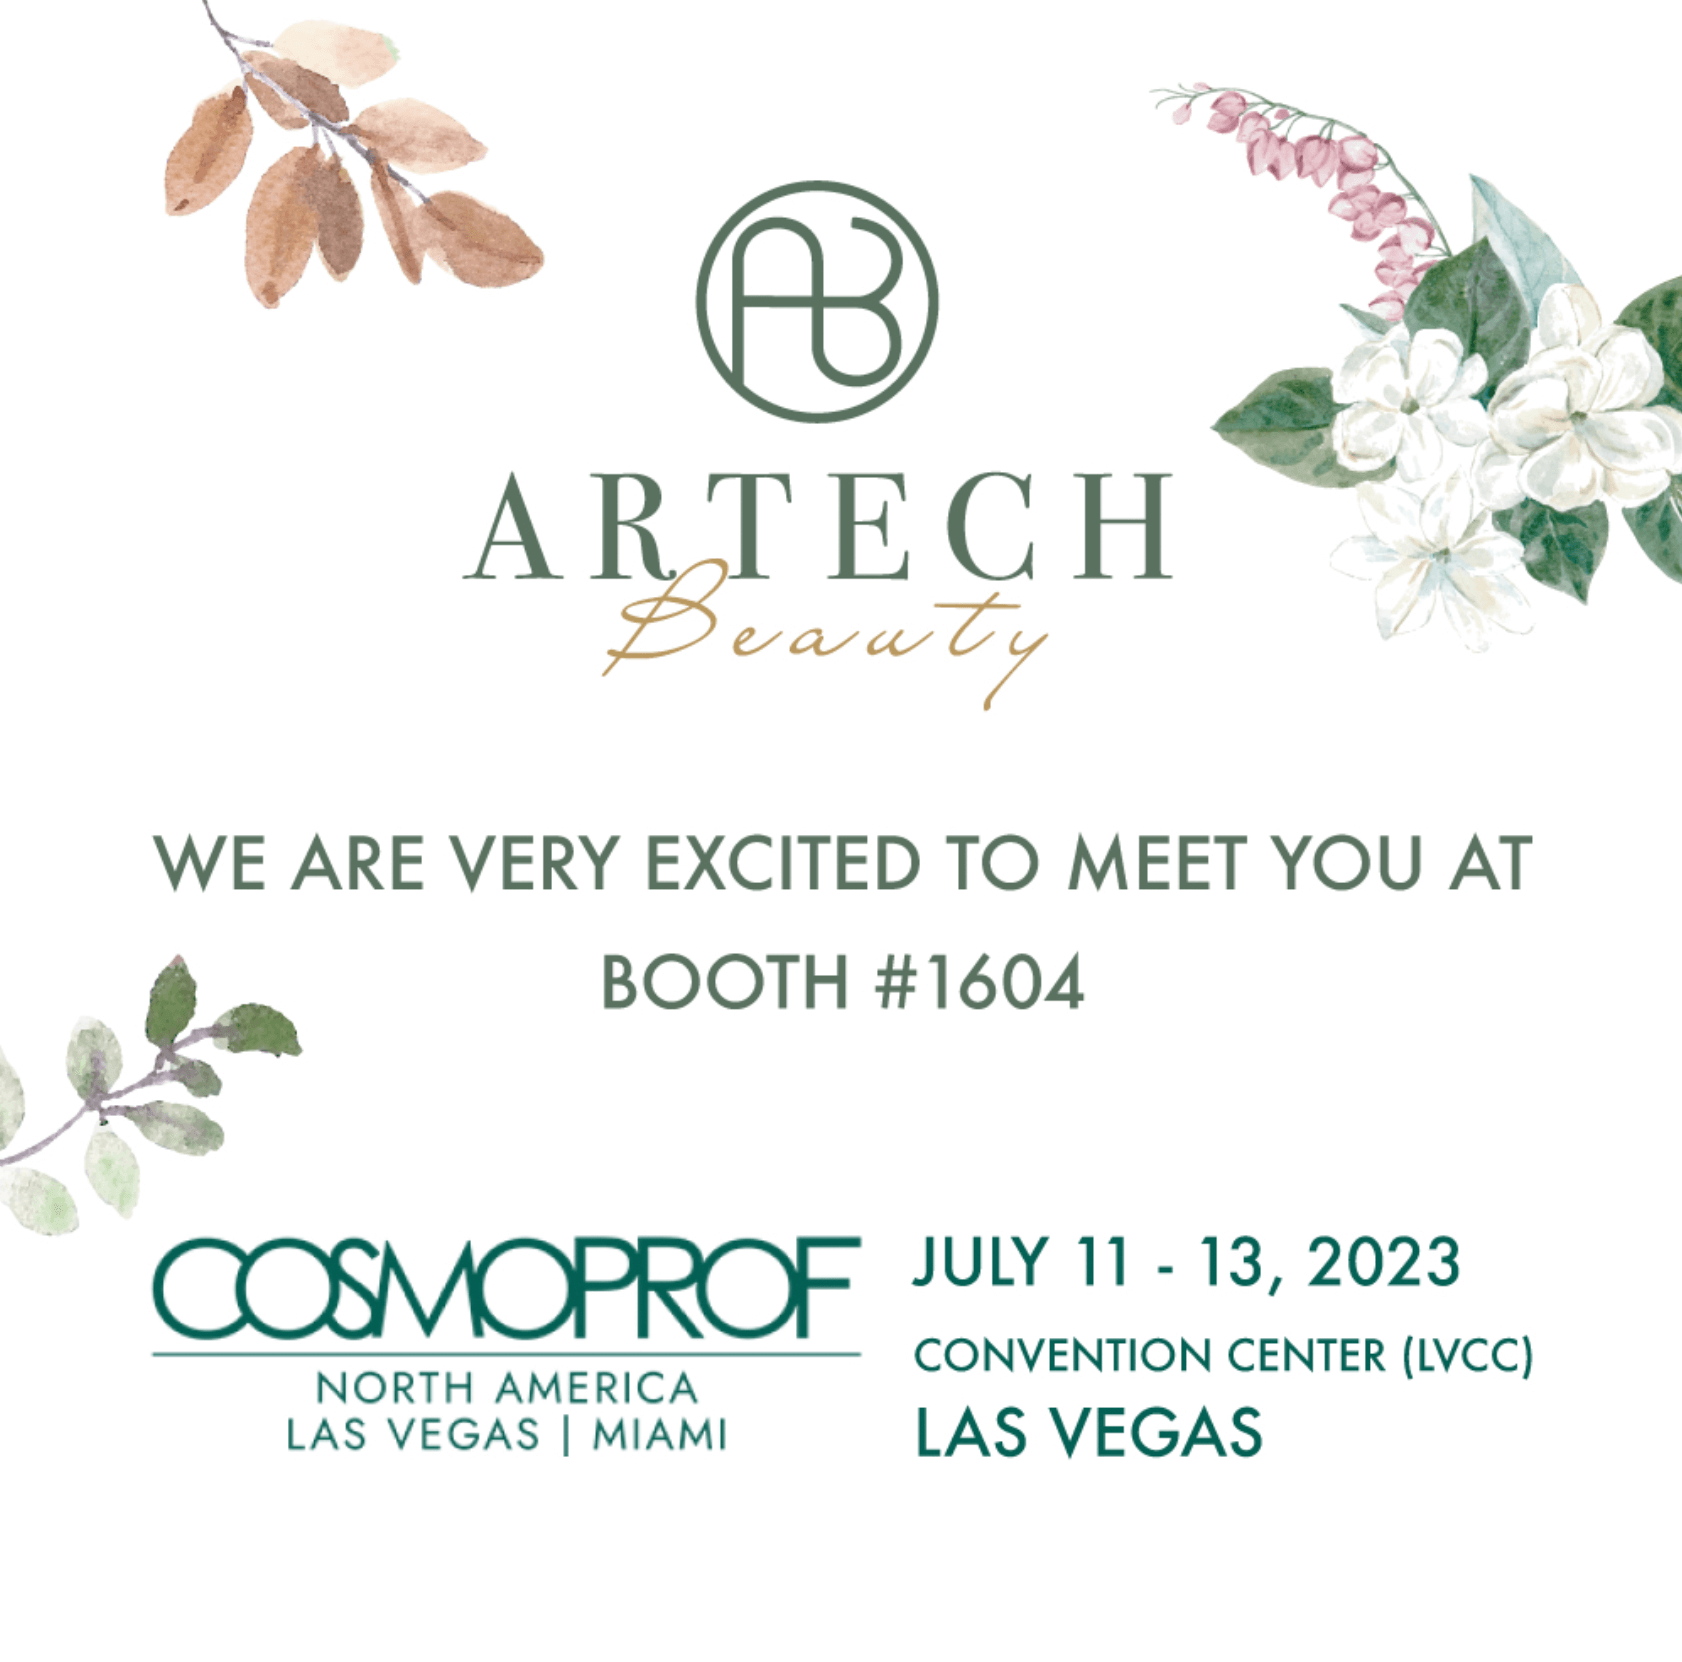 See you at COSMOPROF VEGAS Booth 1604 in July at LVCC!